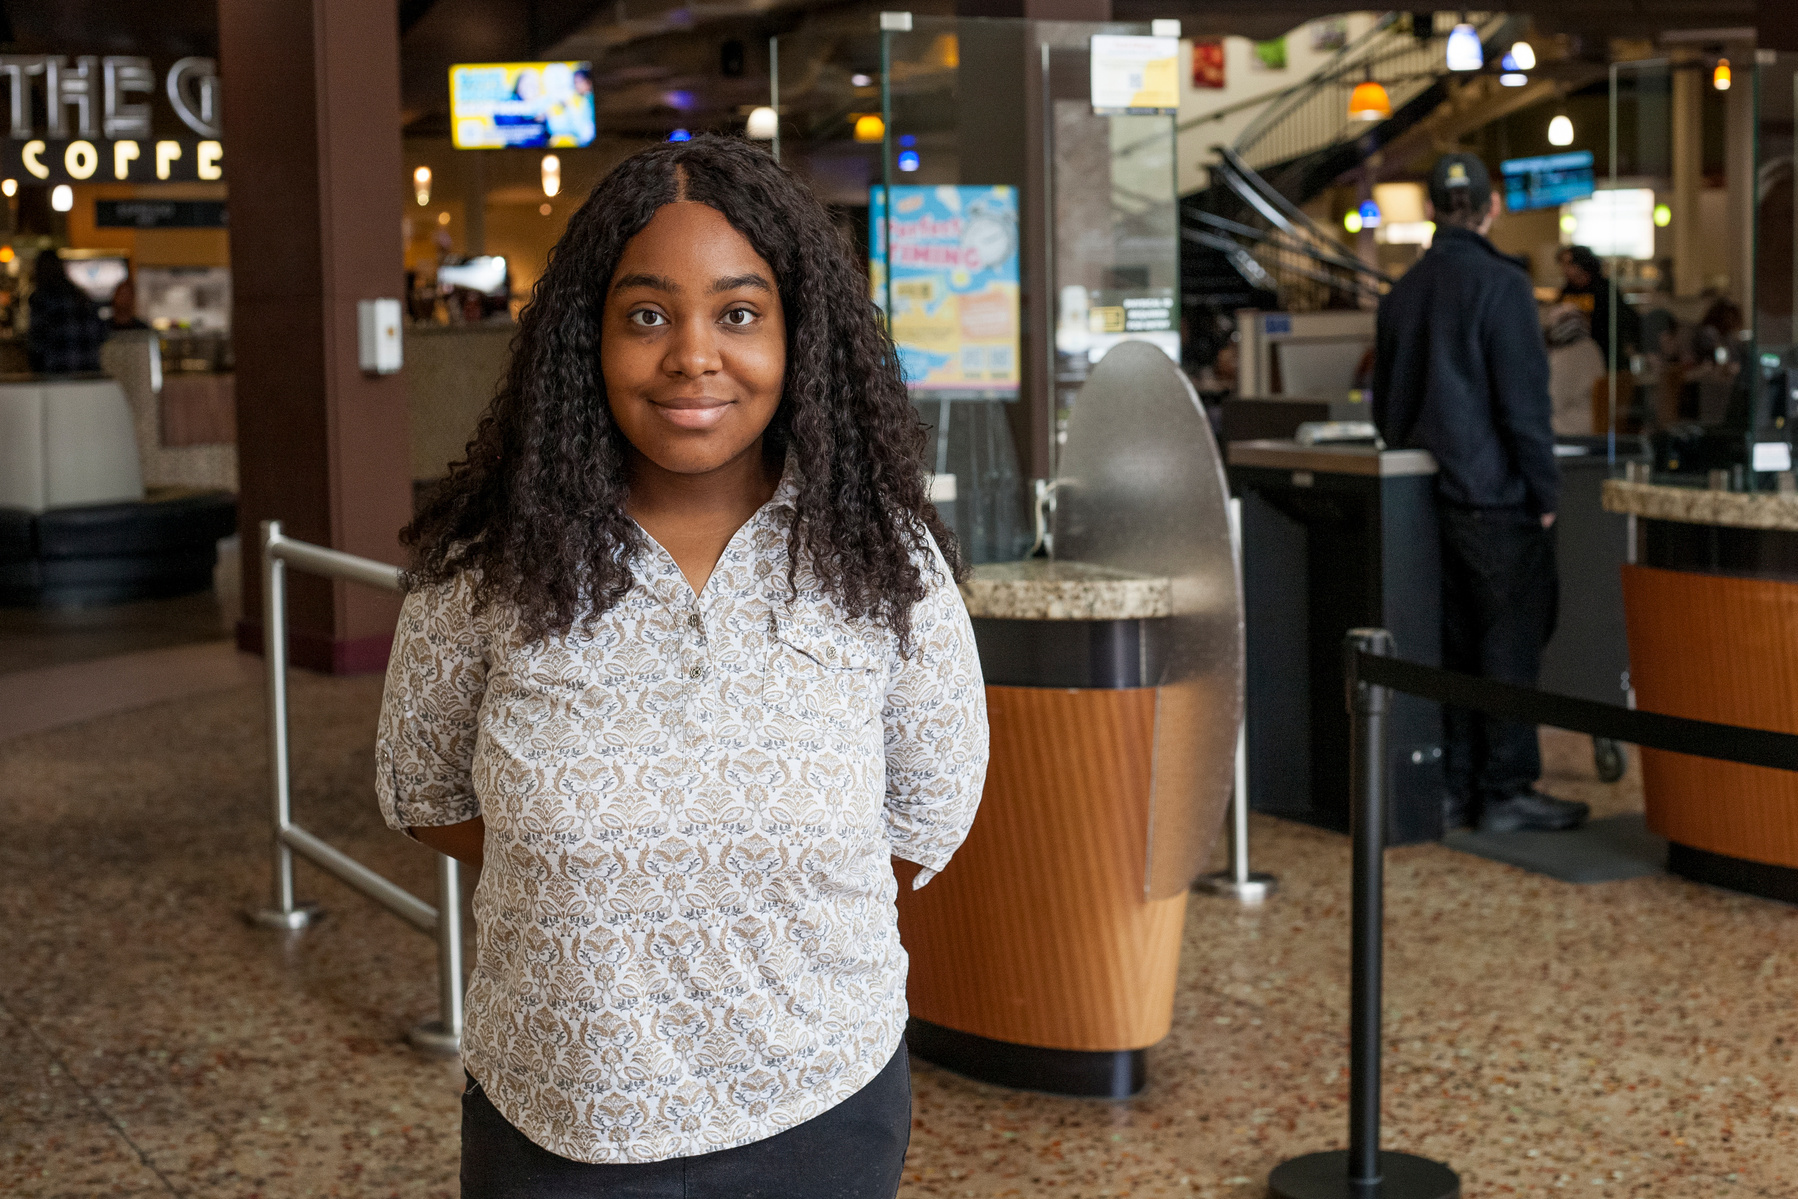 A young African American woman in a white blouse stands in a college cafeteria. 